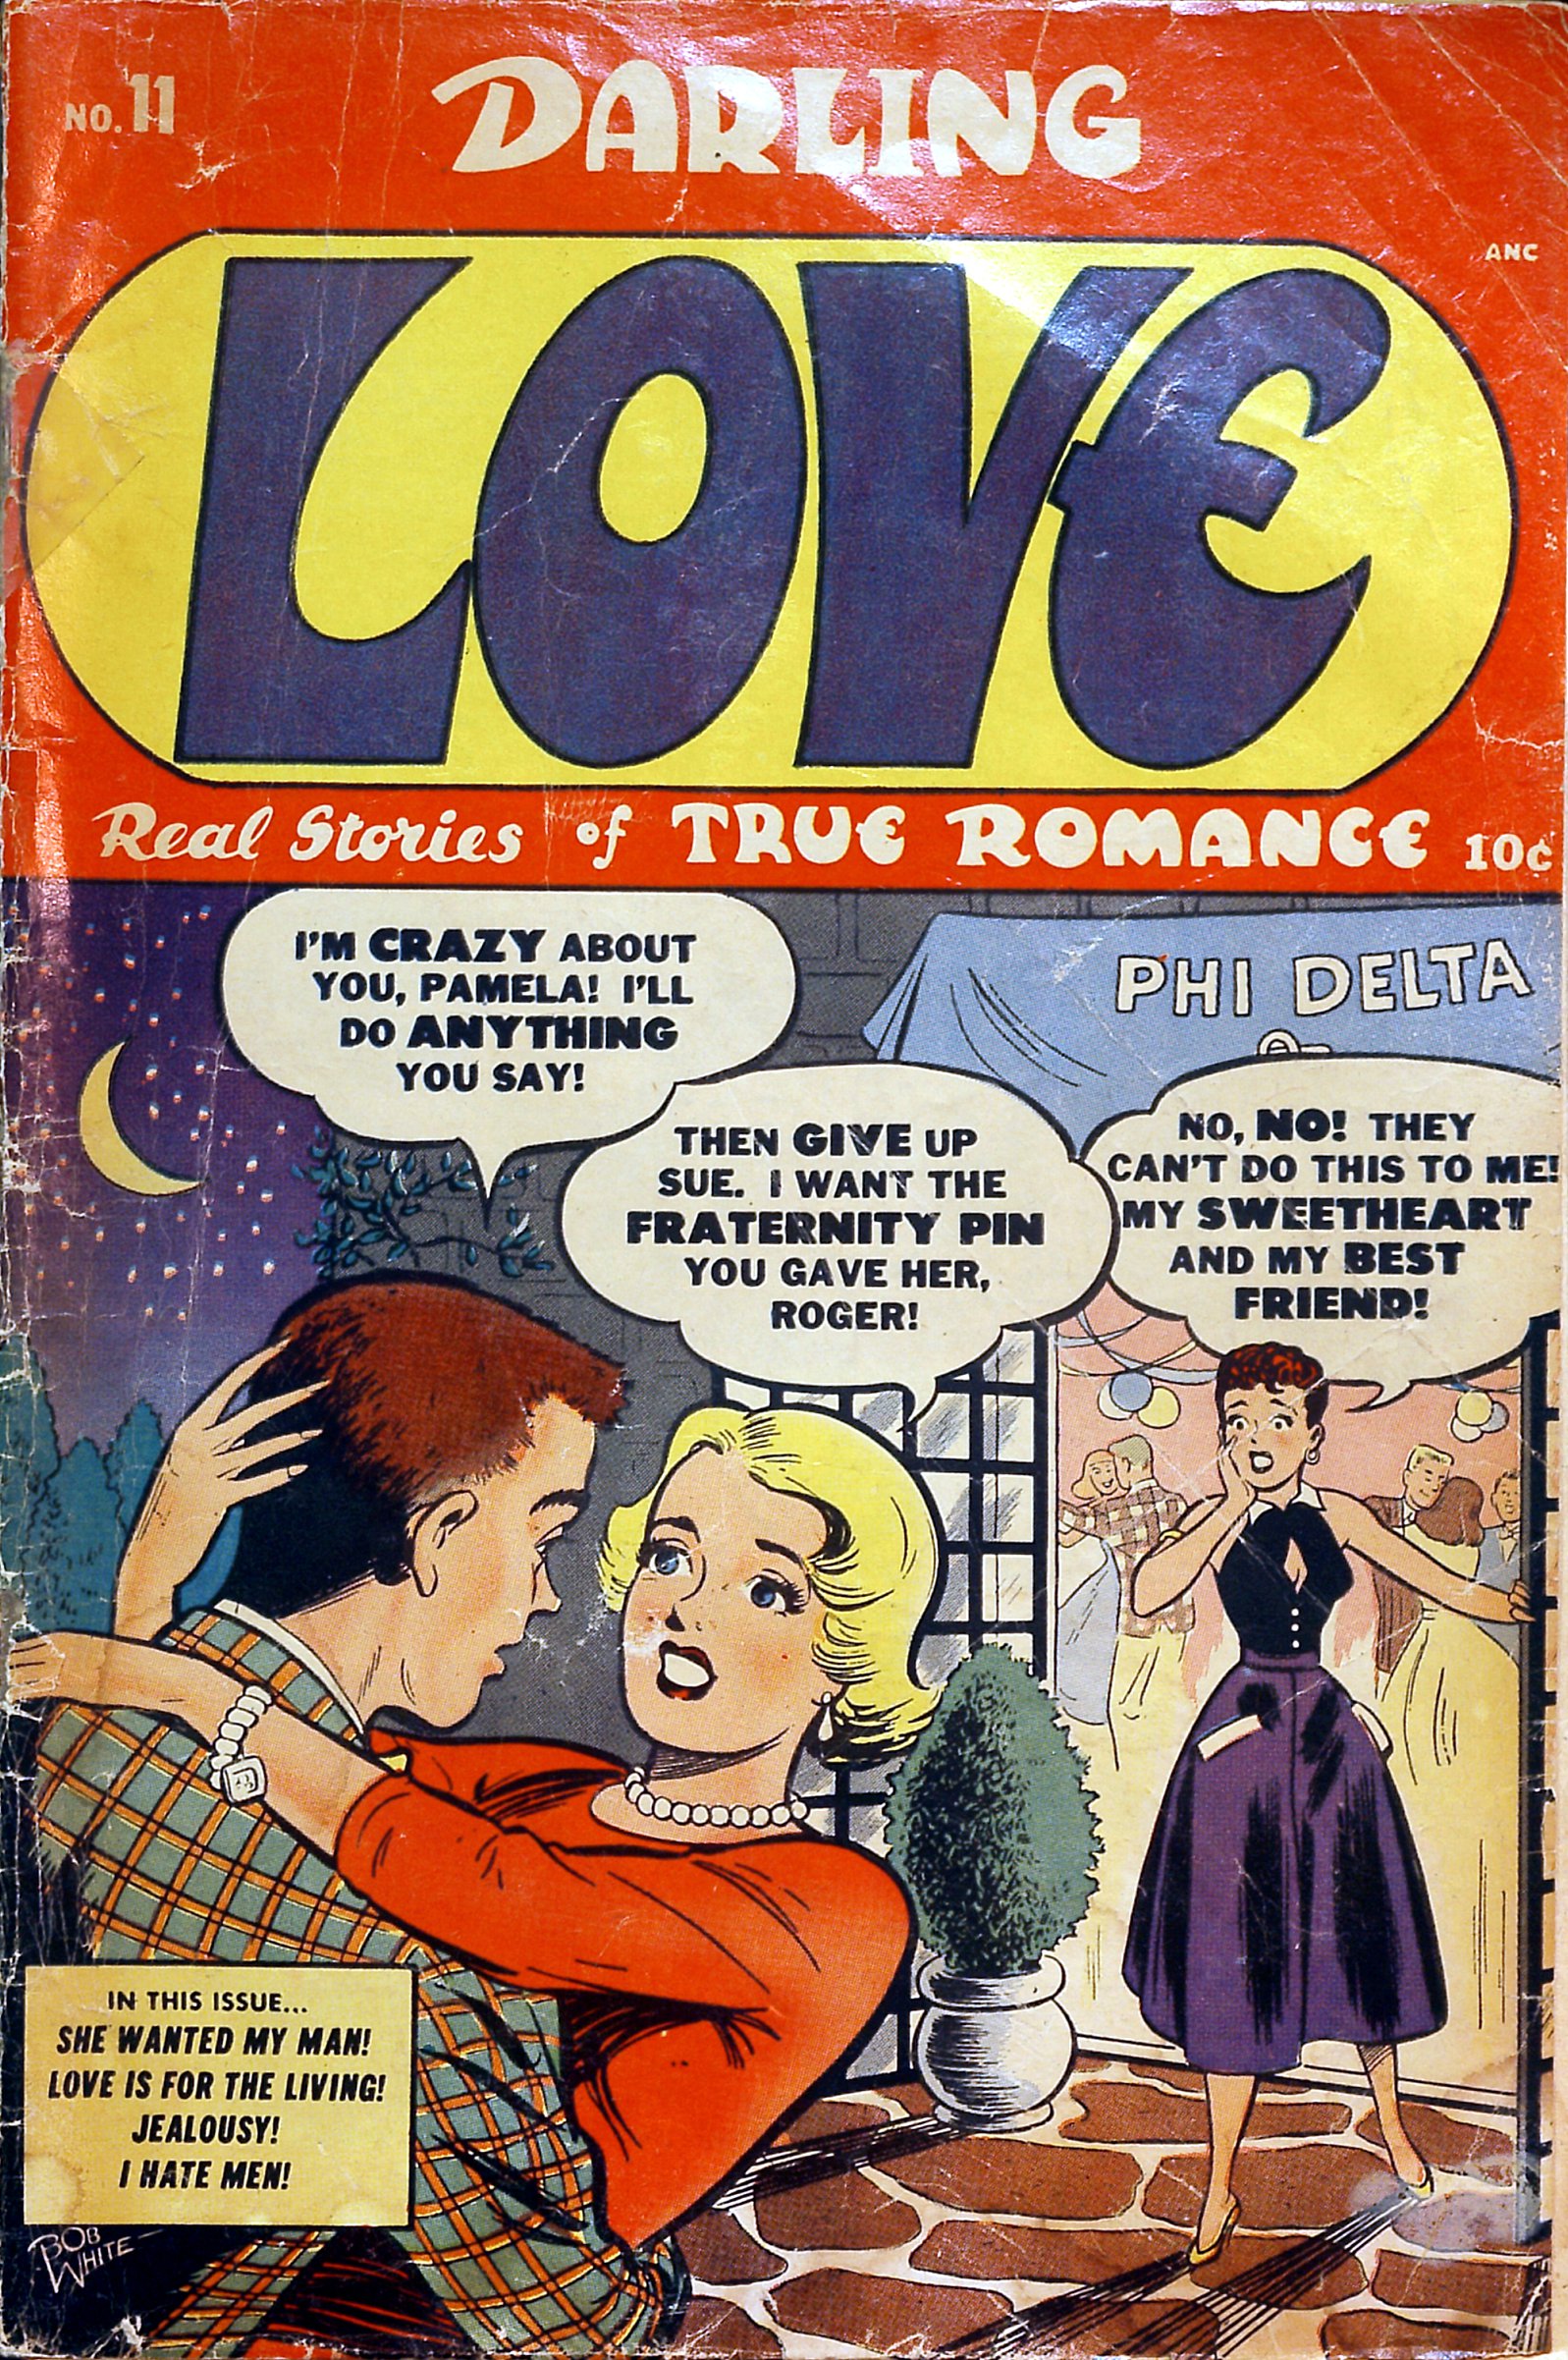 Read online Darling Love comic -  Issue #11 - 1